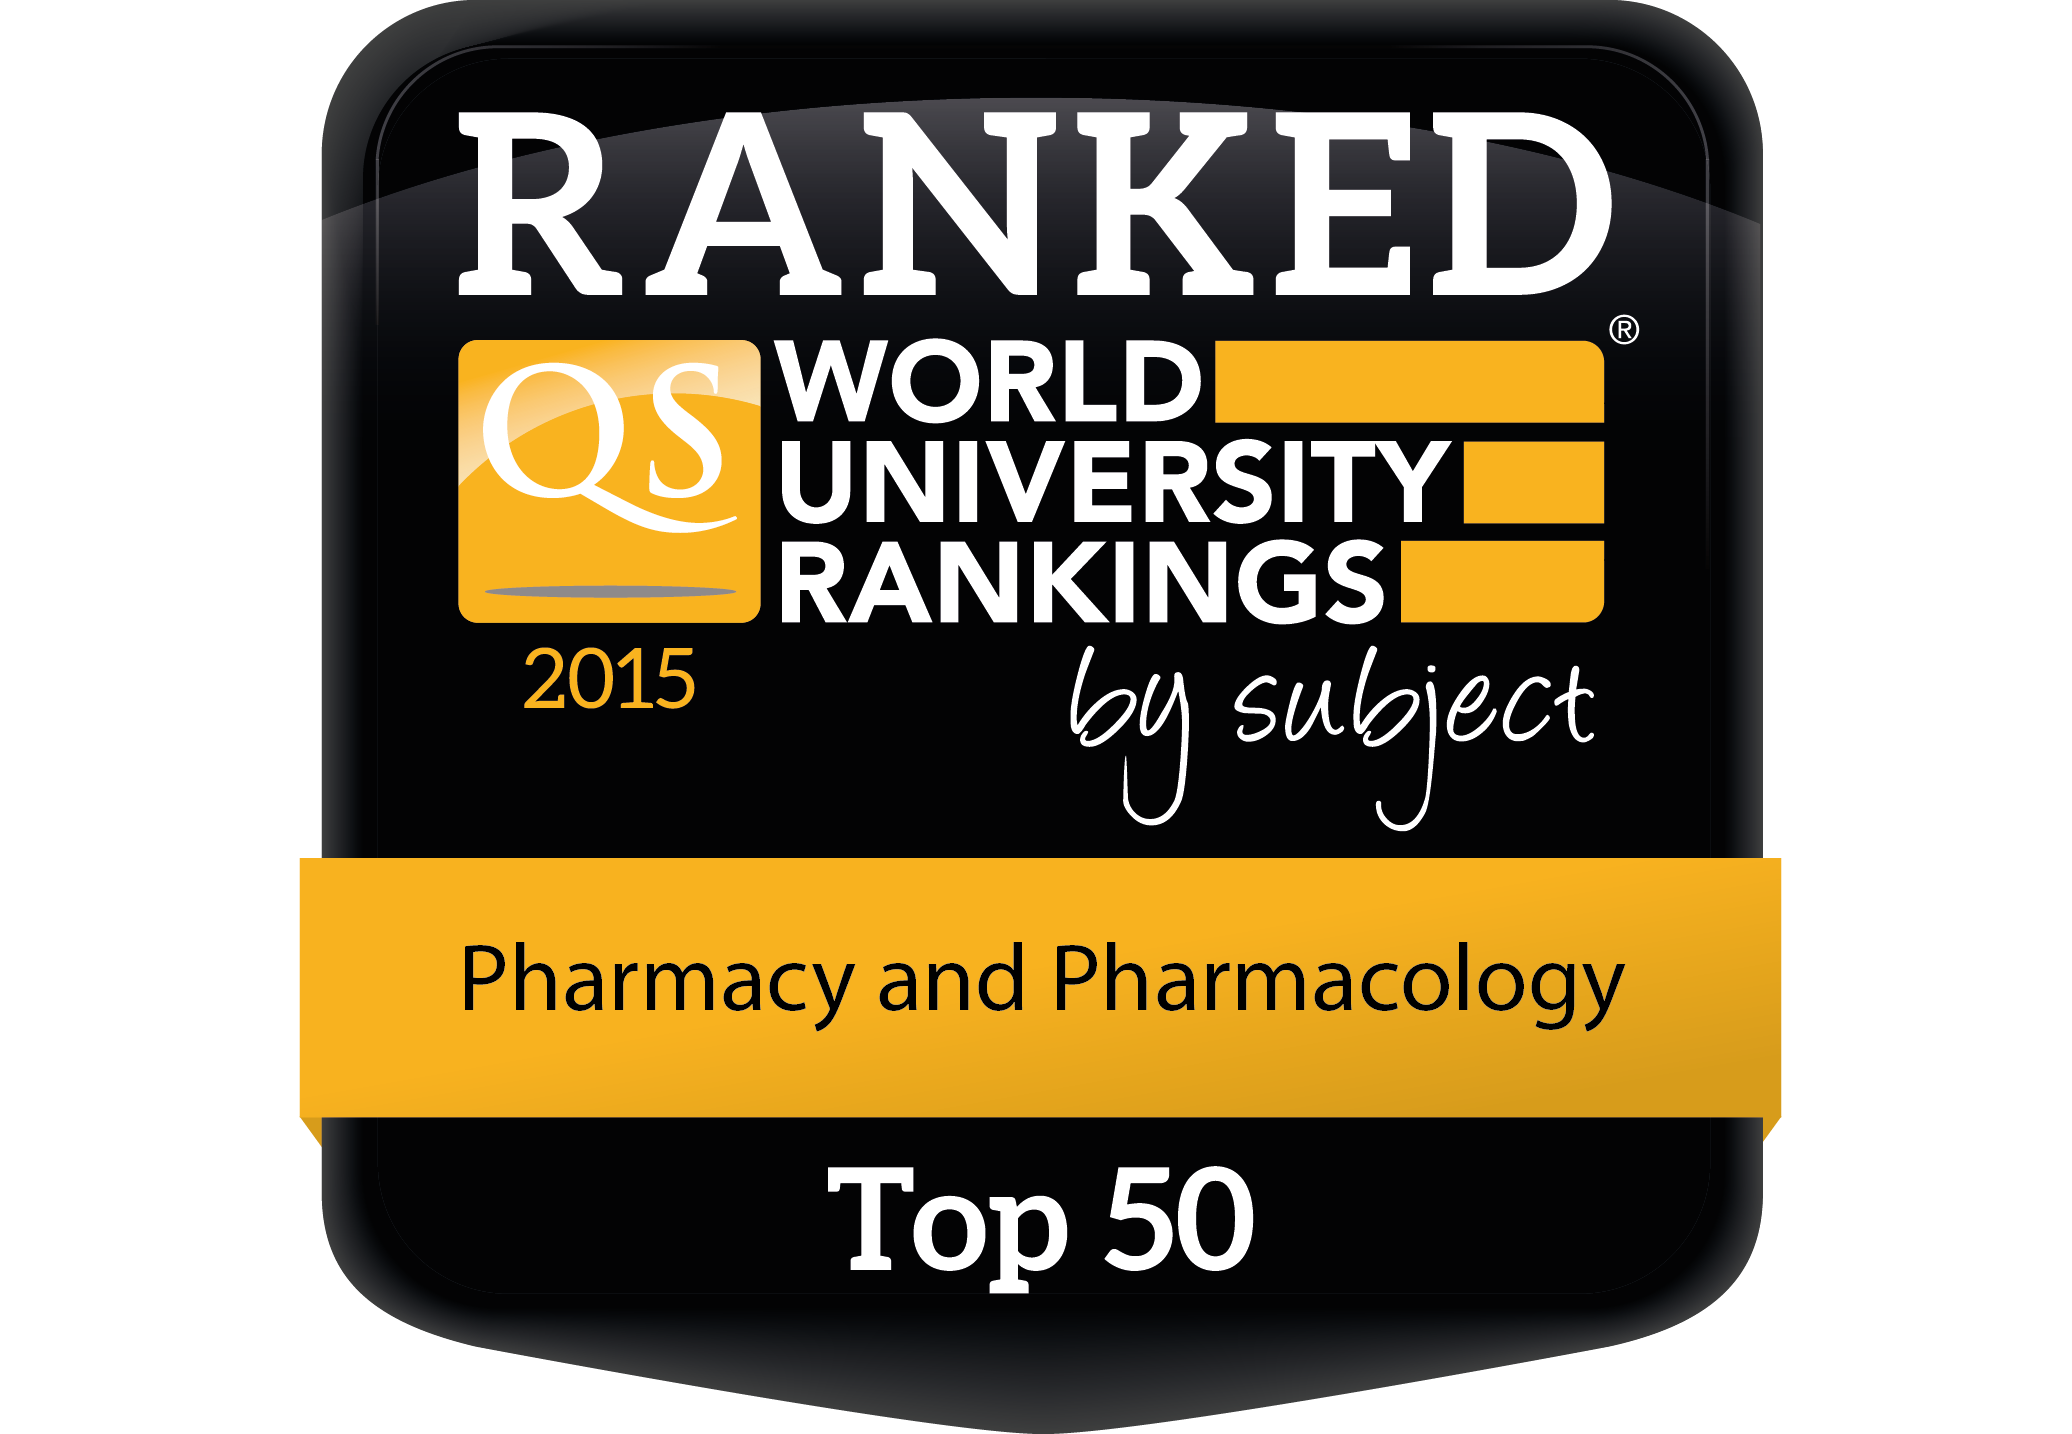 UCC placed in top 50 for Pharmacy & Pharmacology in QS World University Rankings by Subject 2015